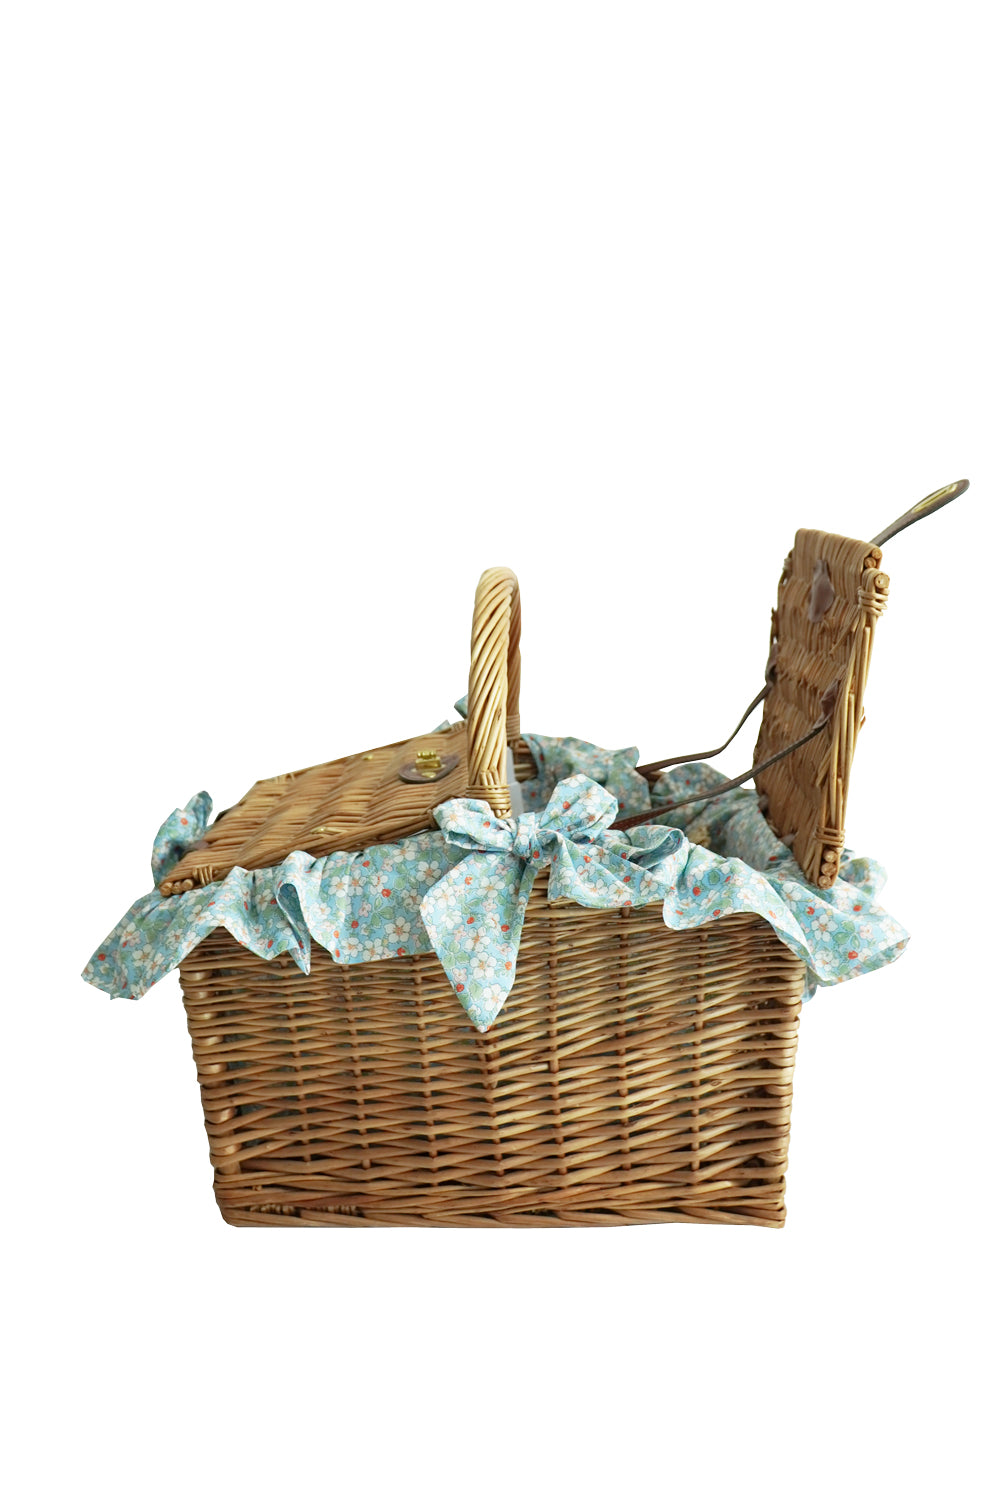 Rectangular Picnic Basket made with Liberty Fabric PAYSANNE BLOSSOM